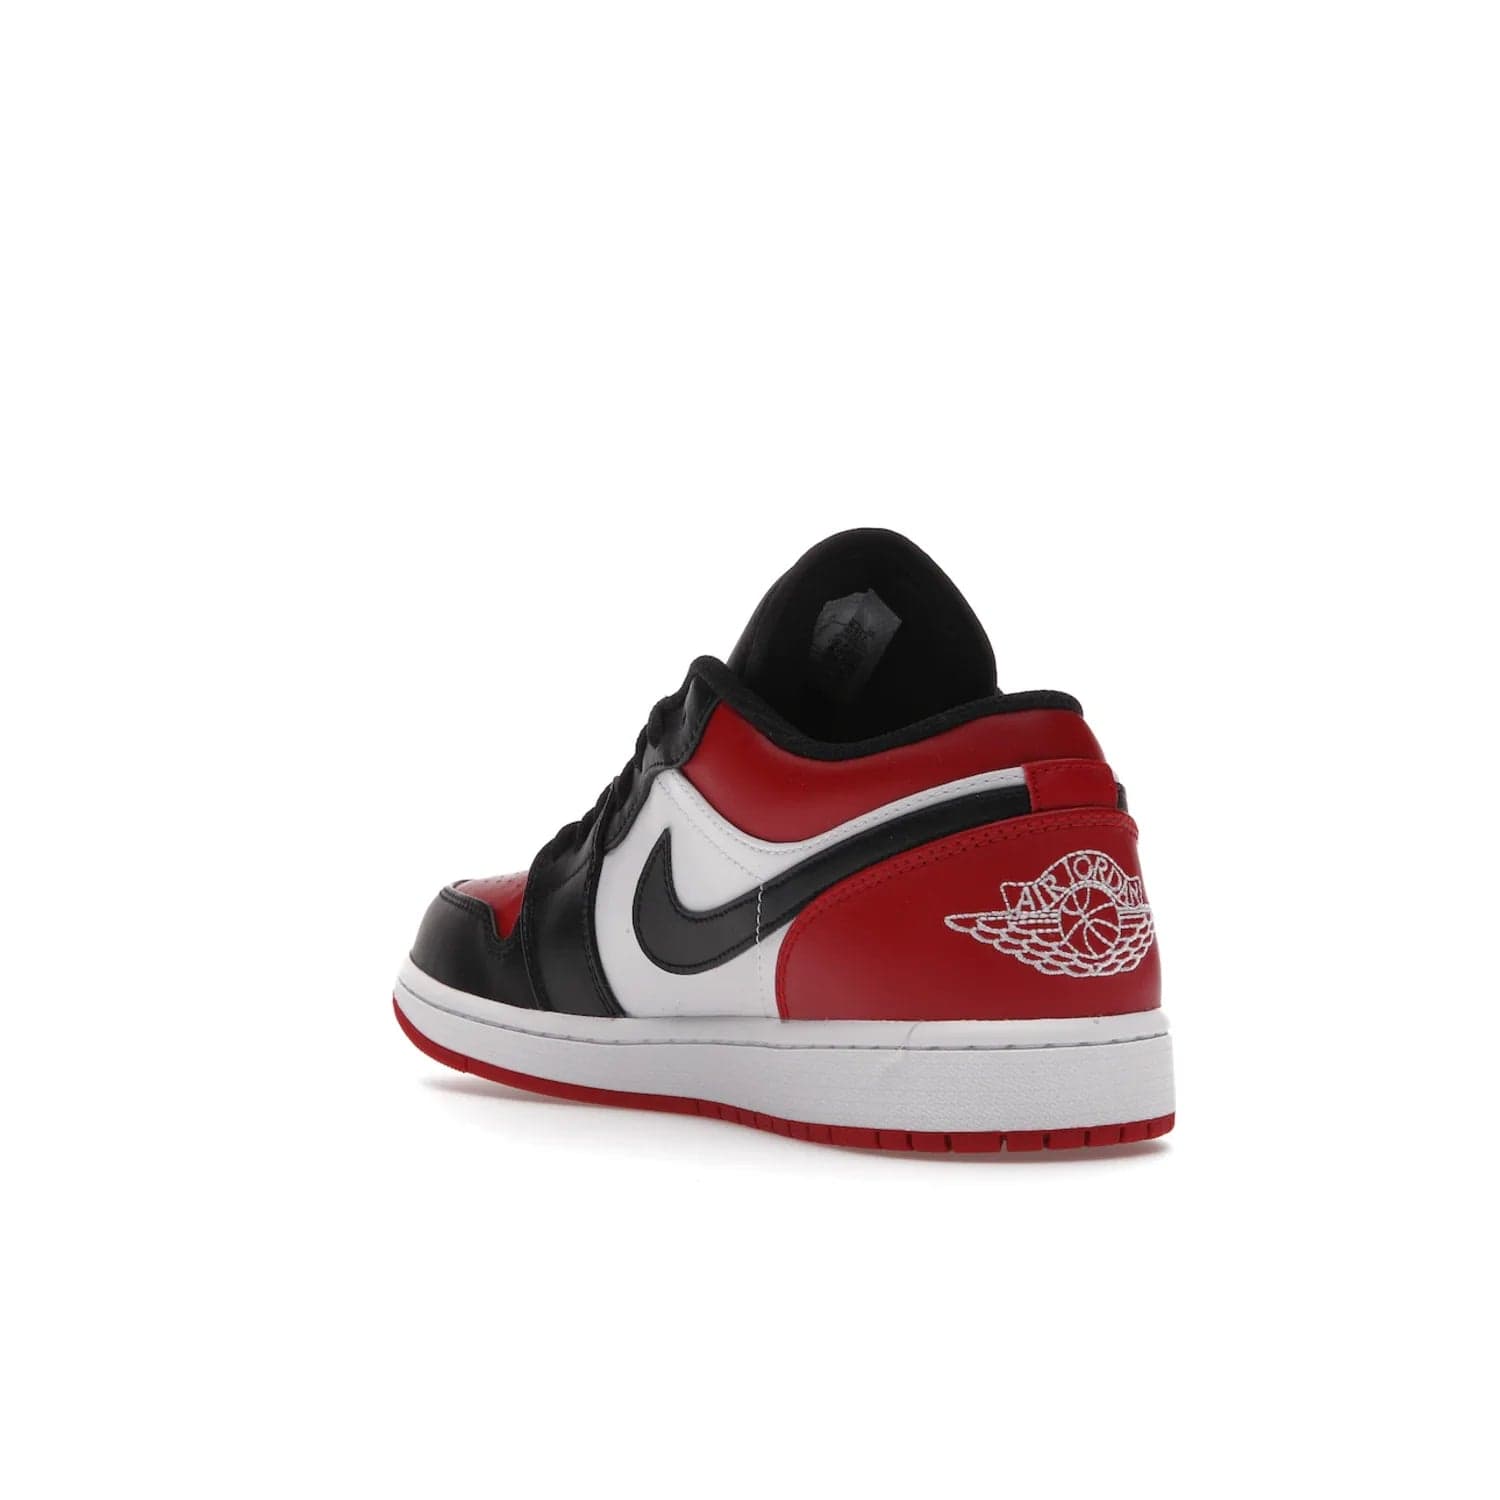 Jordan 1 Low Bred Toe - Image 25 - Only at www.BallersClubKickz.com - Step into the iconic Jordan 1 Retro. Mixing and matching of leather in red, black, and white makes for a unique colorway. Finished off with a Wing logo embroidery & Jumpman label. Comfortable and stylish at an affordable $100, the Jordan 1 Low Bred Toe is perfect for any true sneaker fan.